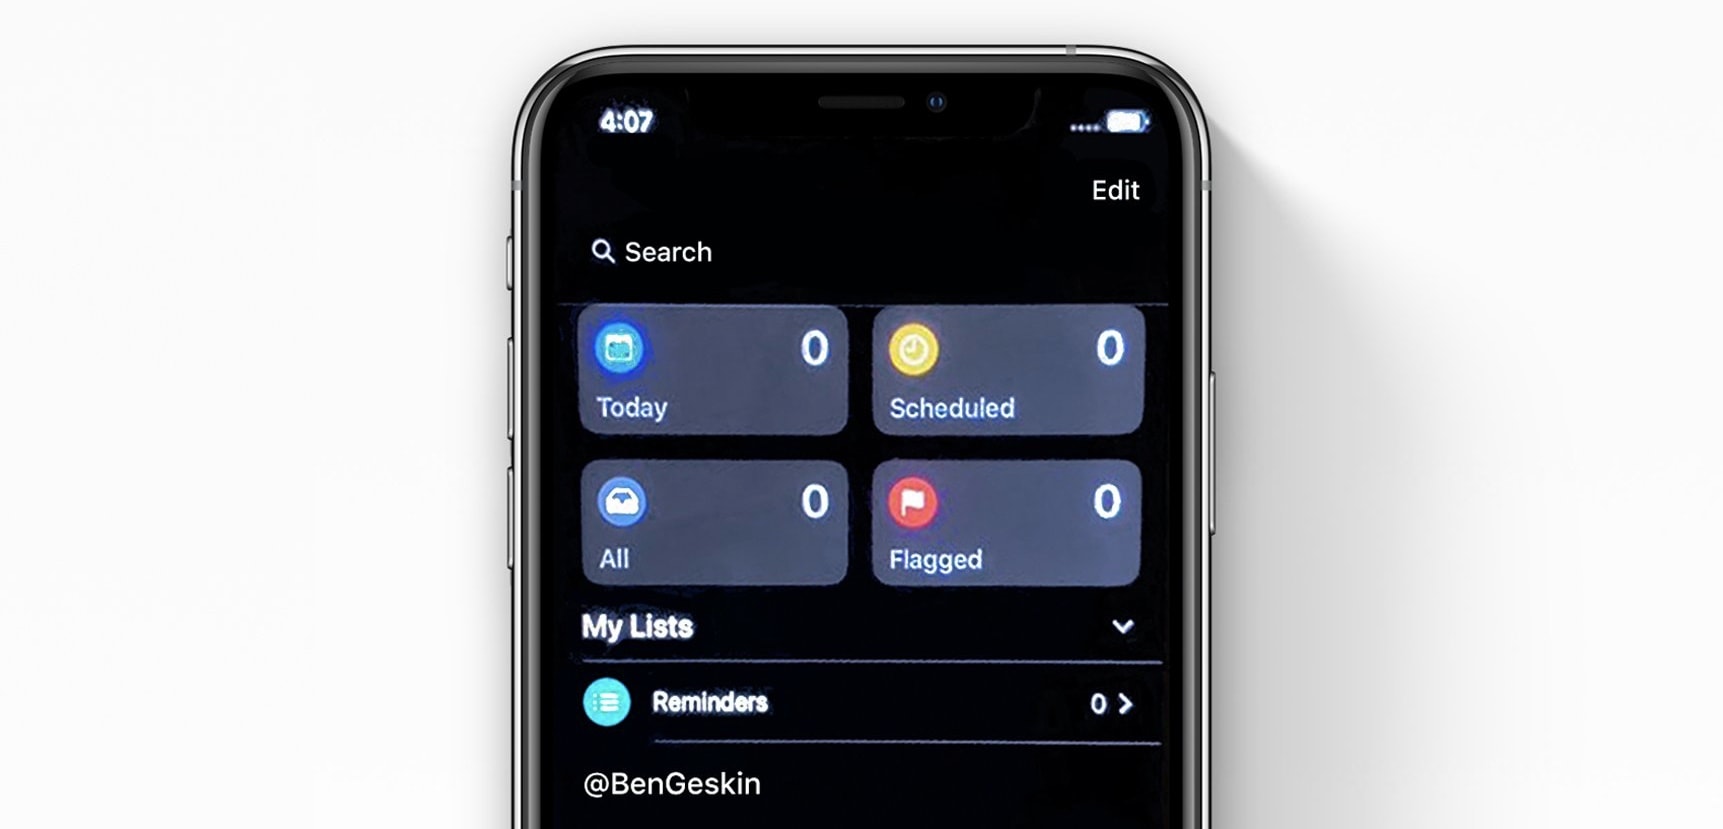 This is iOS 13's new Reminders app with dark mode on iPhone